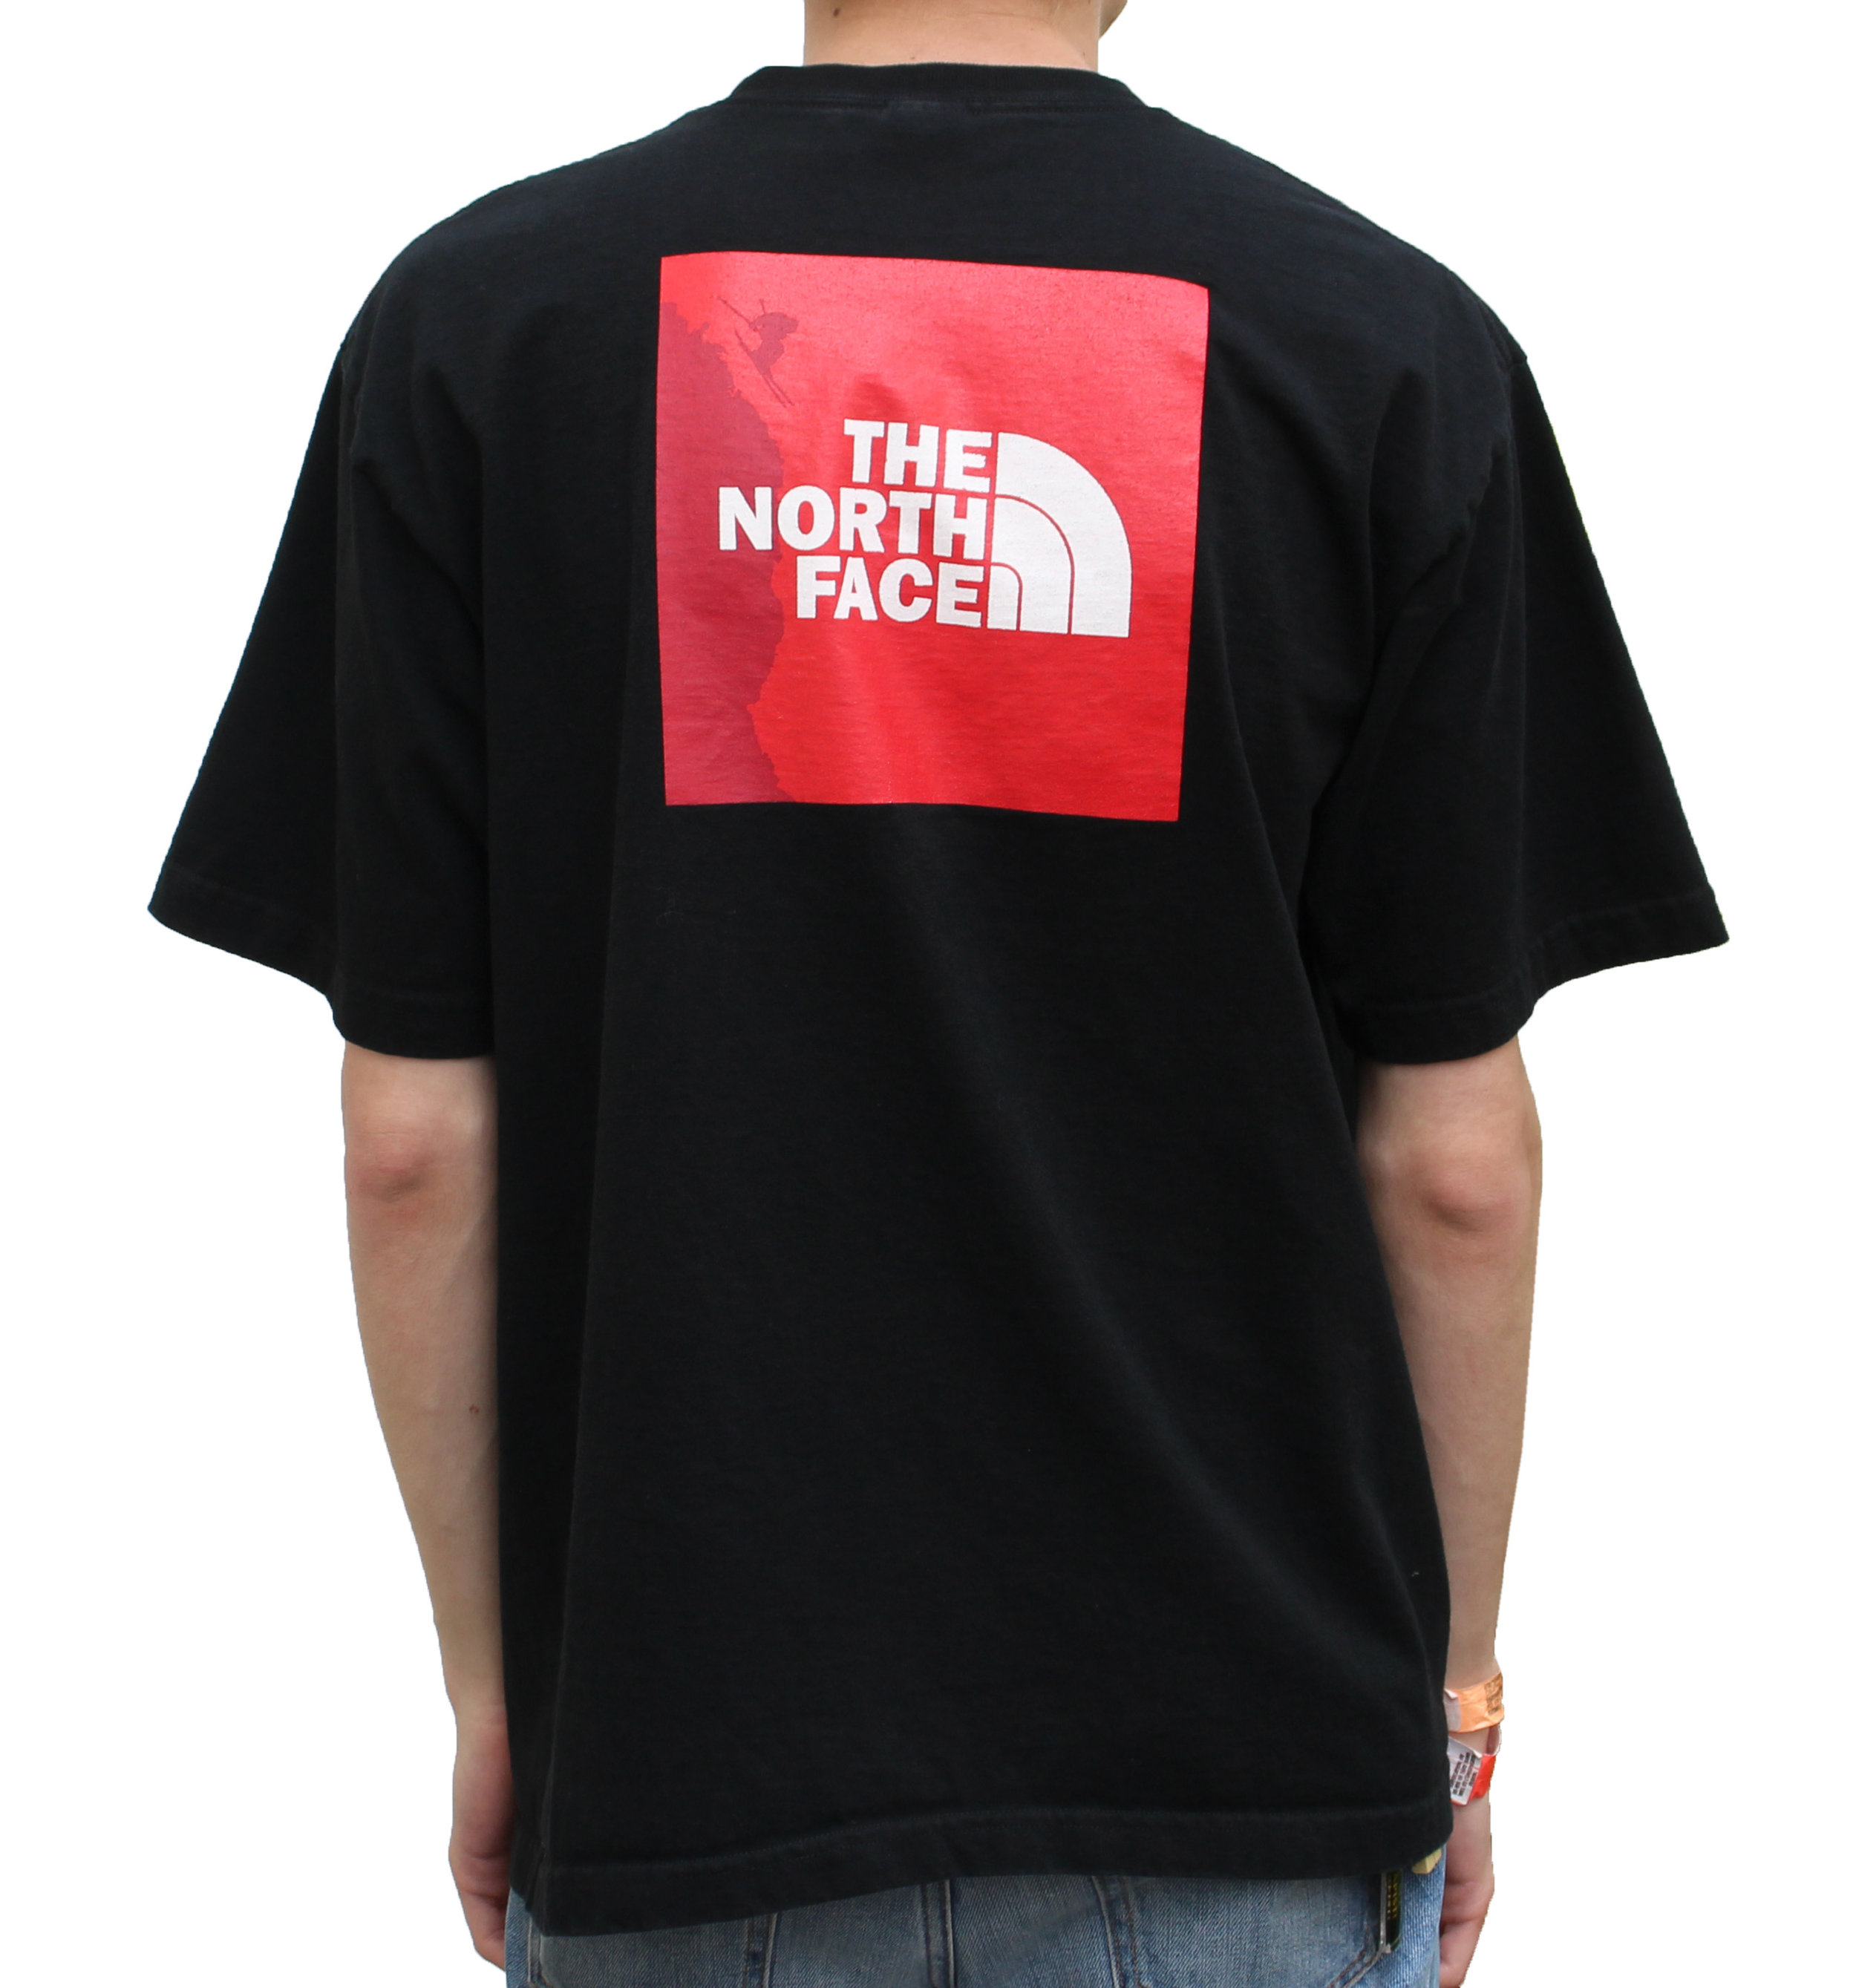 The North Face Never Stop Exploring Deals, 41% OFF | www.ilpungolo.org